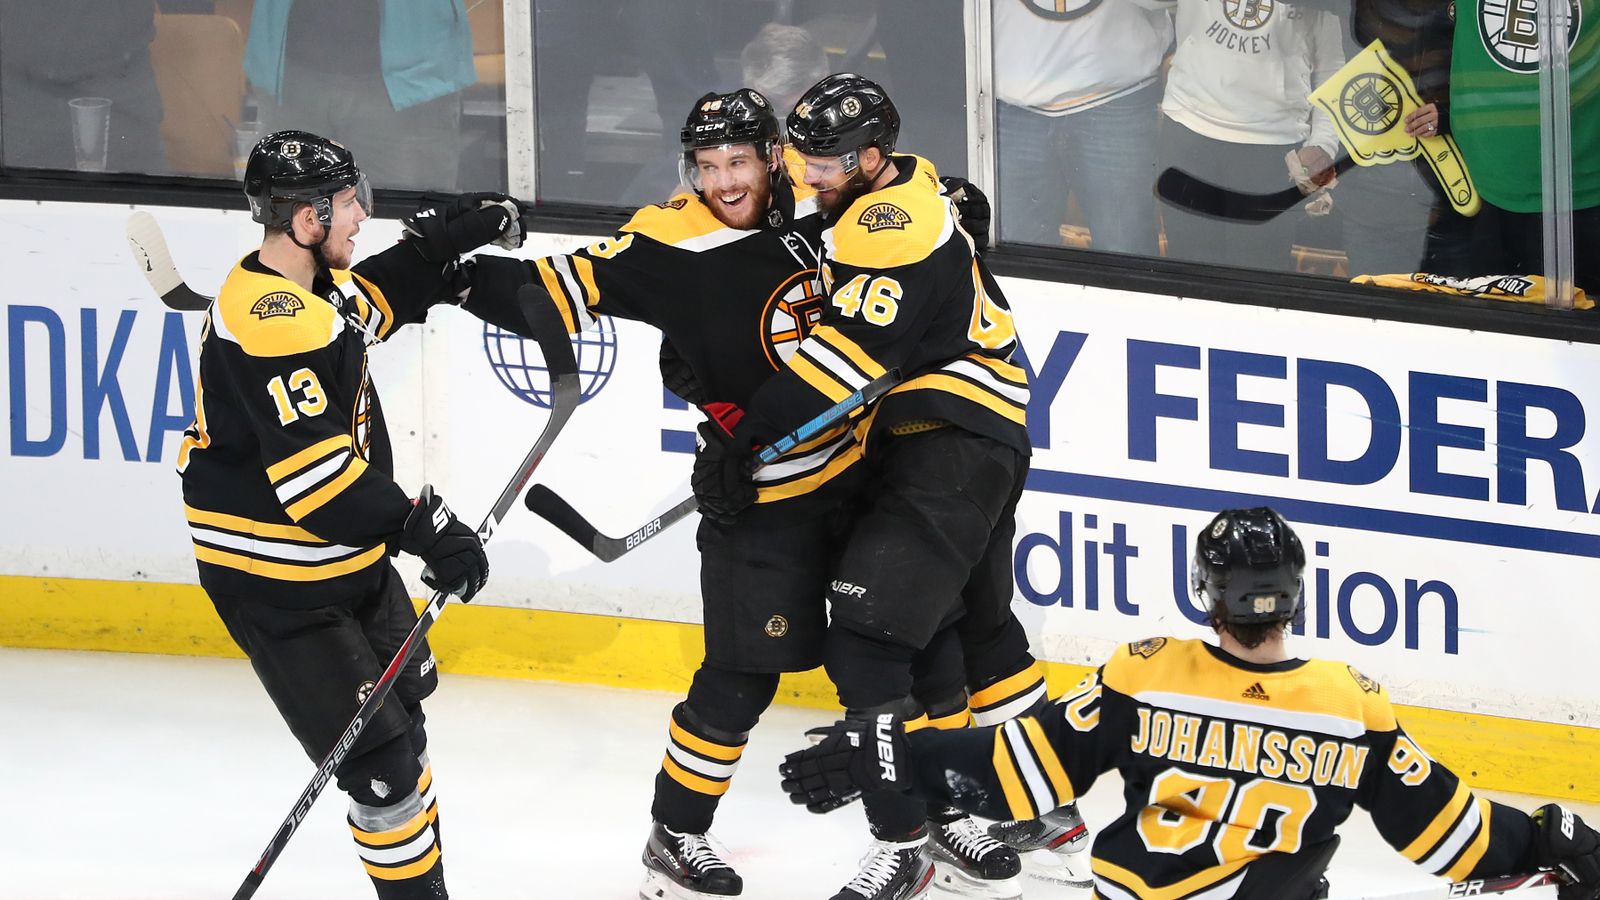 Ex-Terriers Have Huge Role in Bruins Stanley Cup Run, BU Today